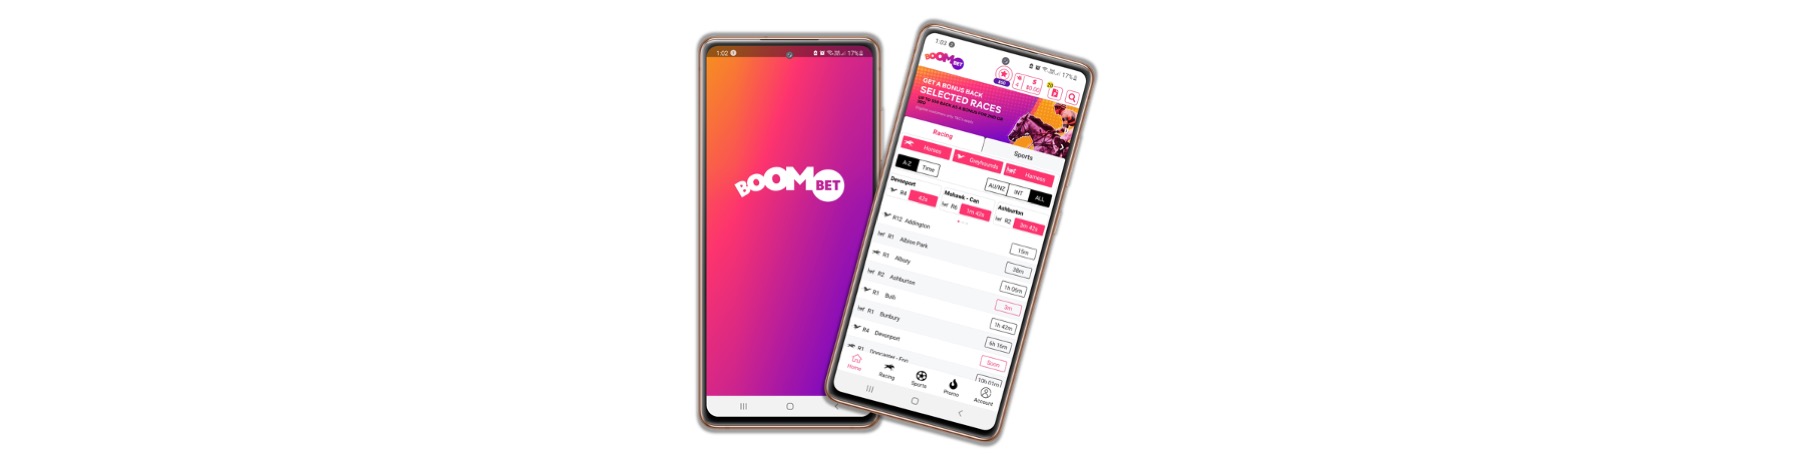 BoomBet Android App